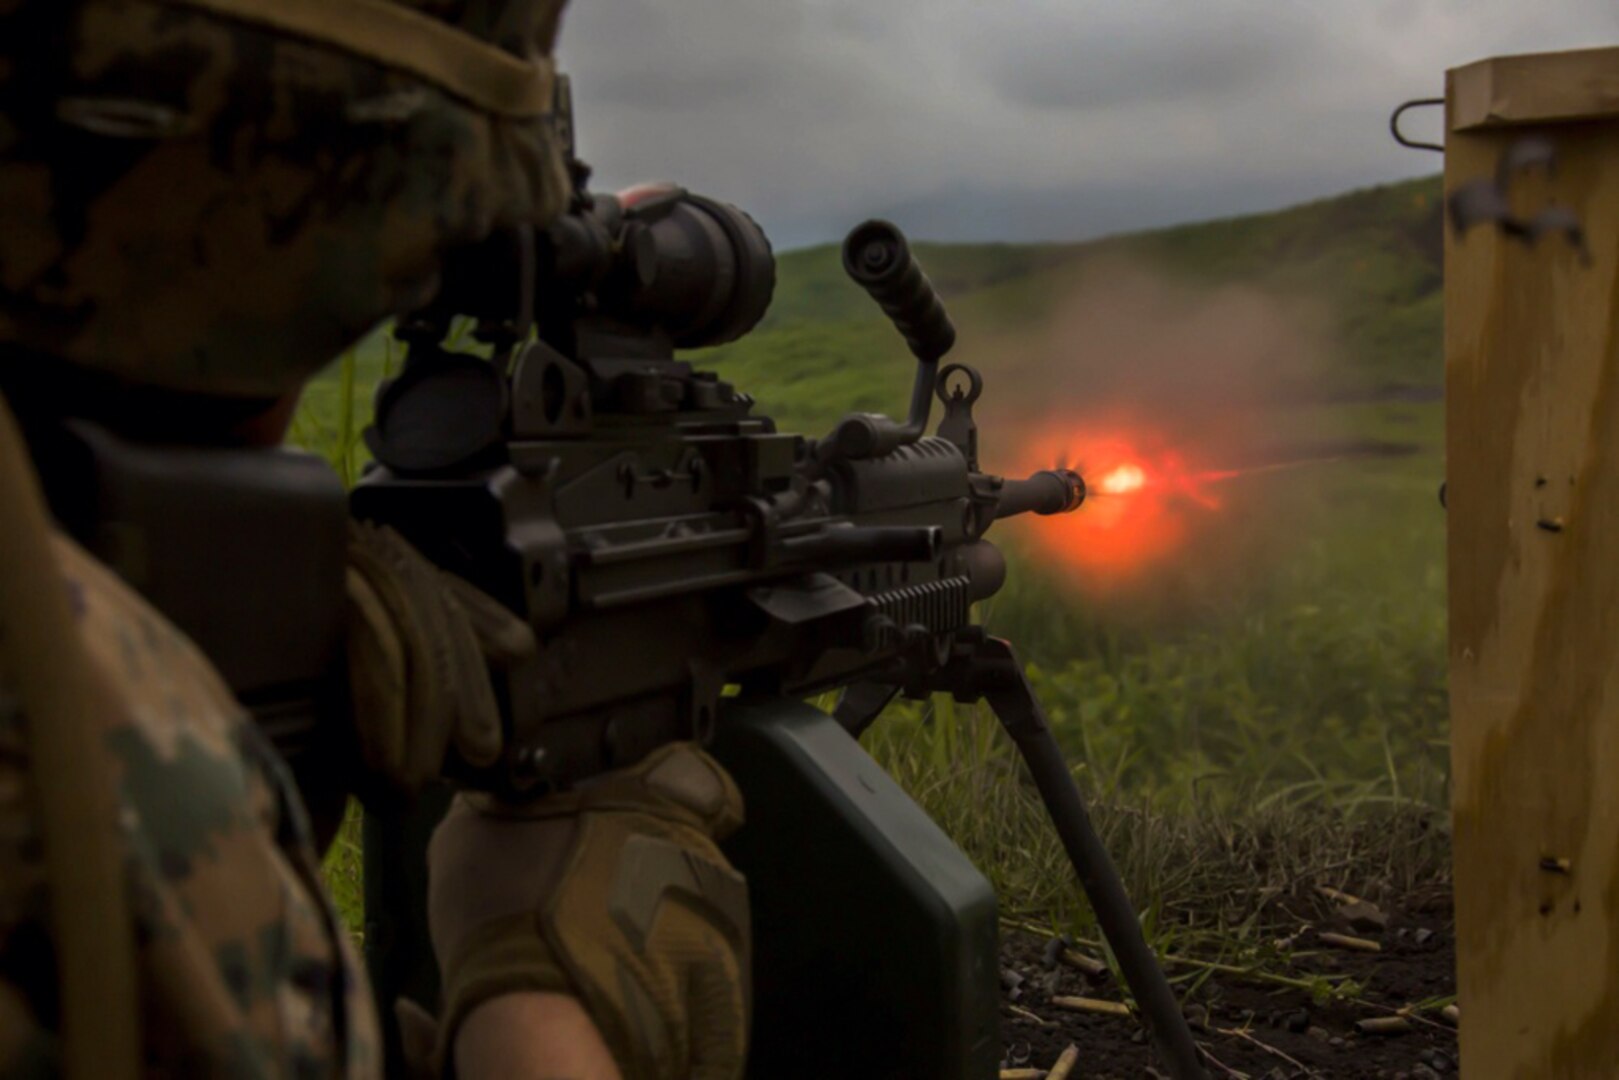 A U.S. Marine with Marine Wing Support Squadron (MWSS) 171, based out of Marine Corps Air Station Iwakuni, shoots an M240B machine gun during phase two of Eagle Wrath 2017 at Combined Arms Training Center Camp Fuji, Japan, July, 5, 2017. Phase two consisted of conducting live-fire training exercises to give MWSS-171 the knowledge and confidence to utilize weapons systems effectively in a deployed environment. 

